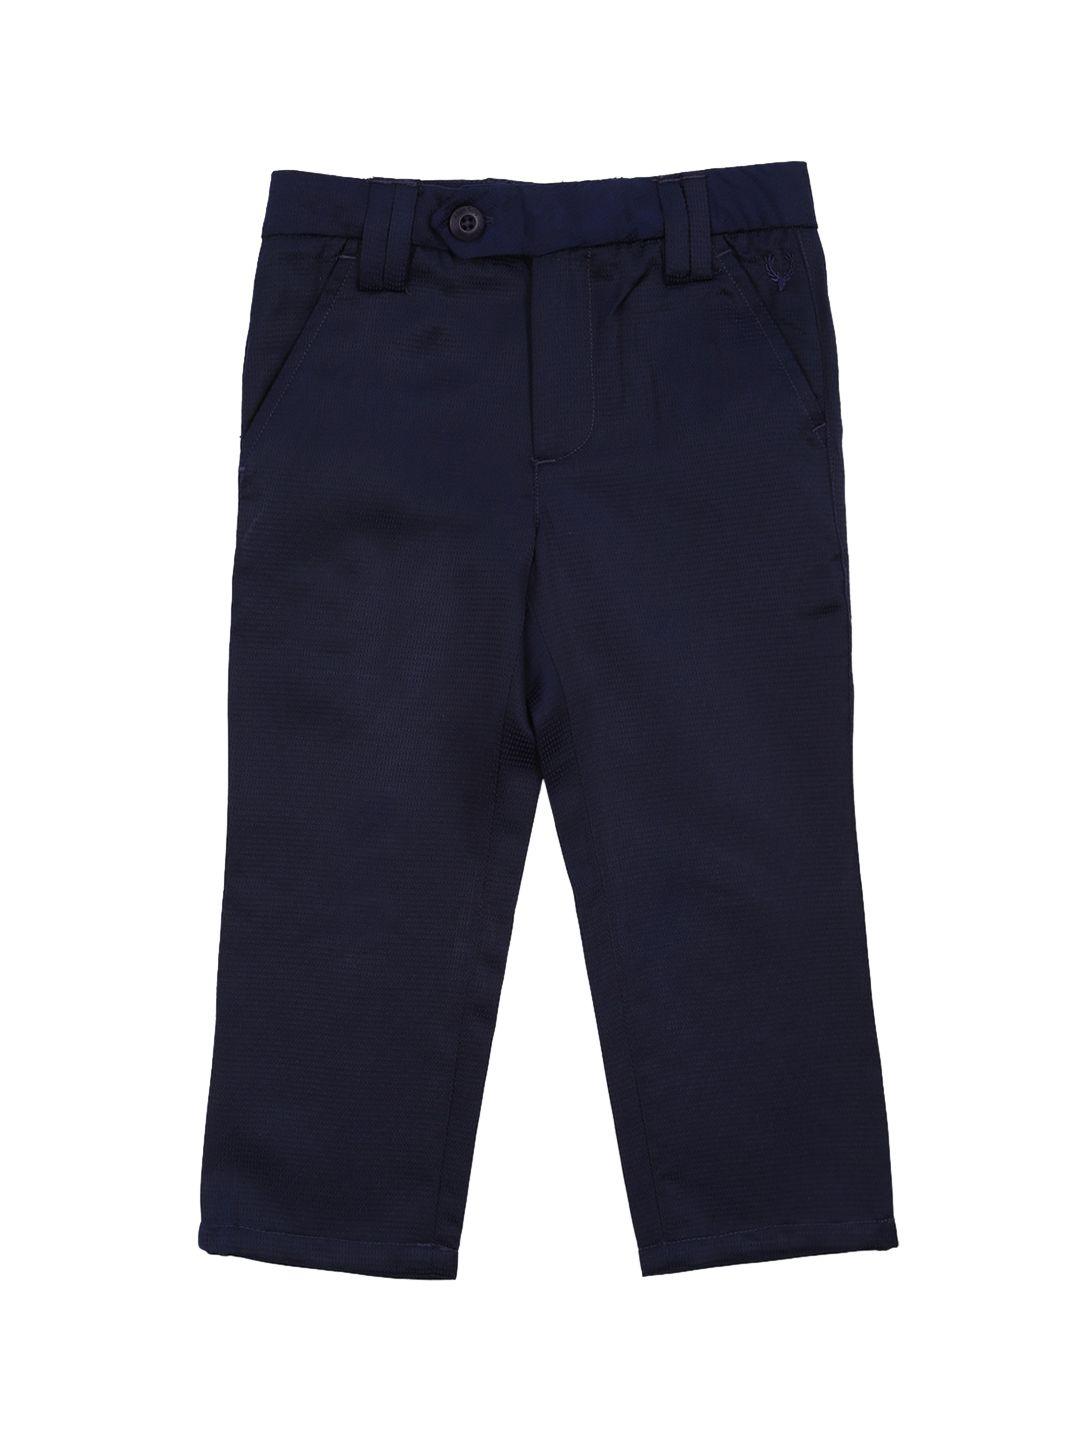 Allen Solly Junior Boys Navy Blue Slim Fit Chinos Trousers